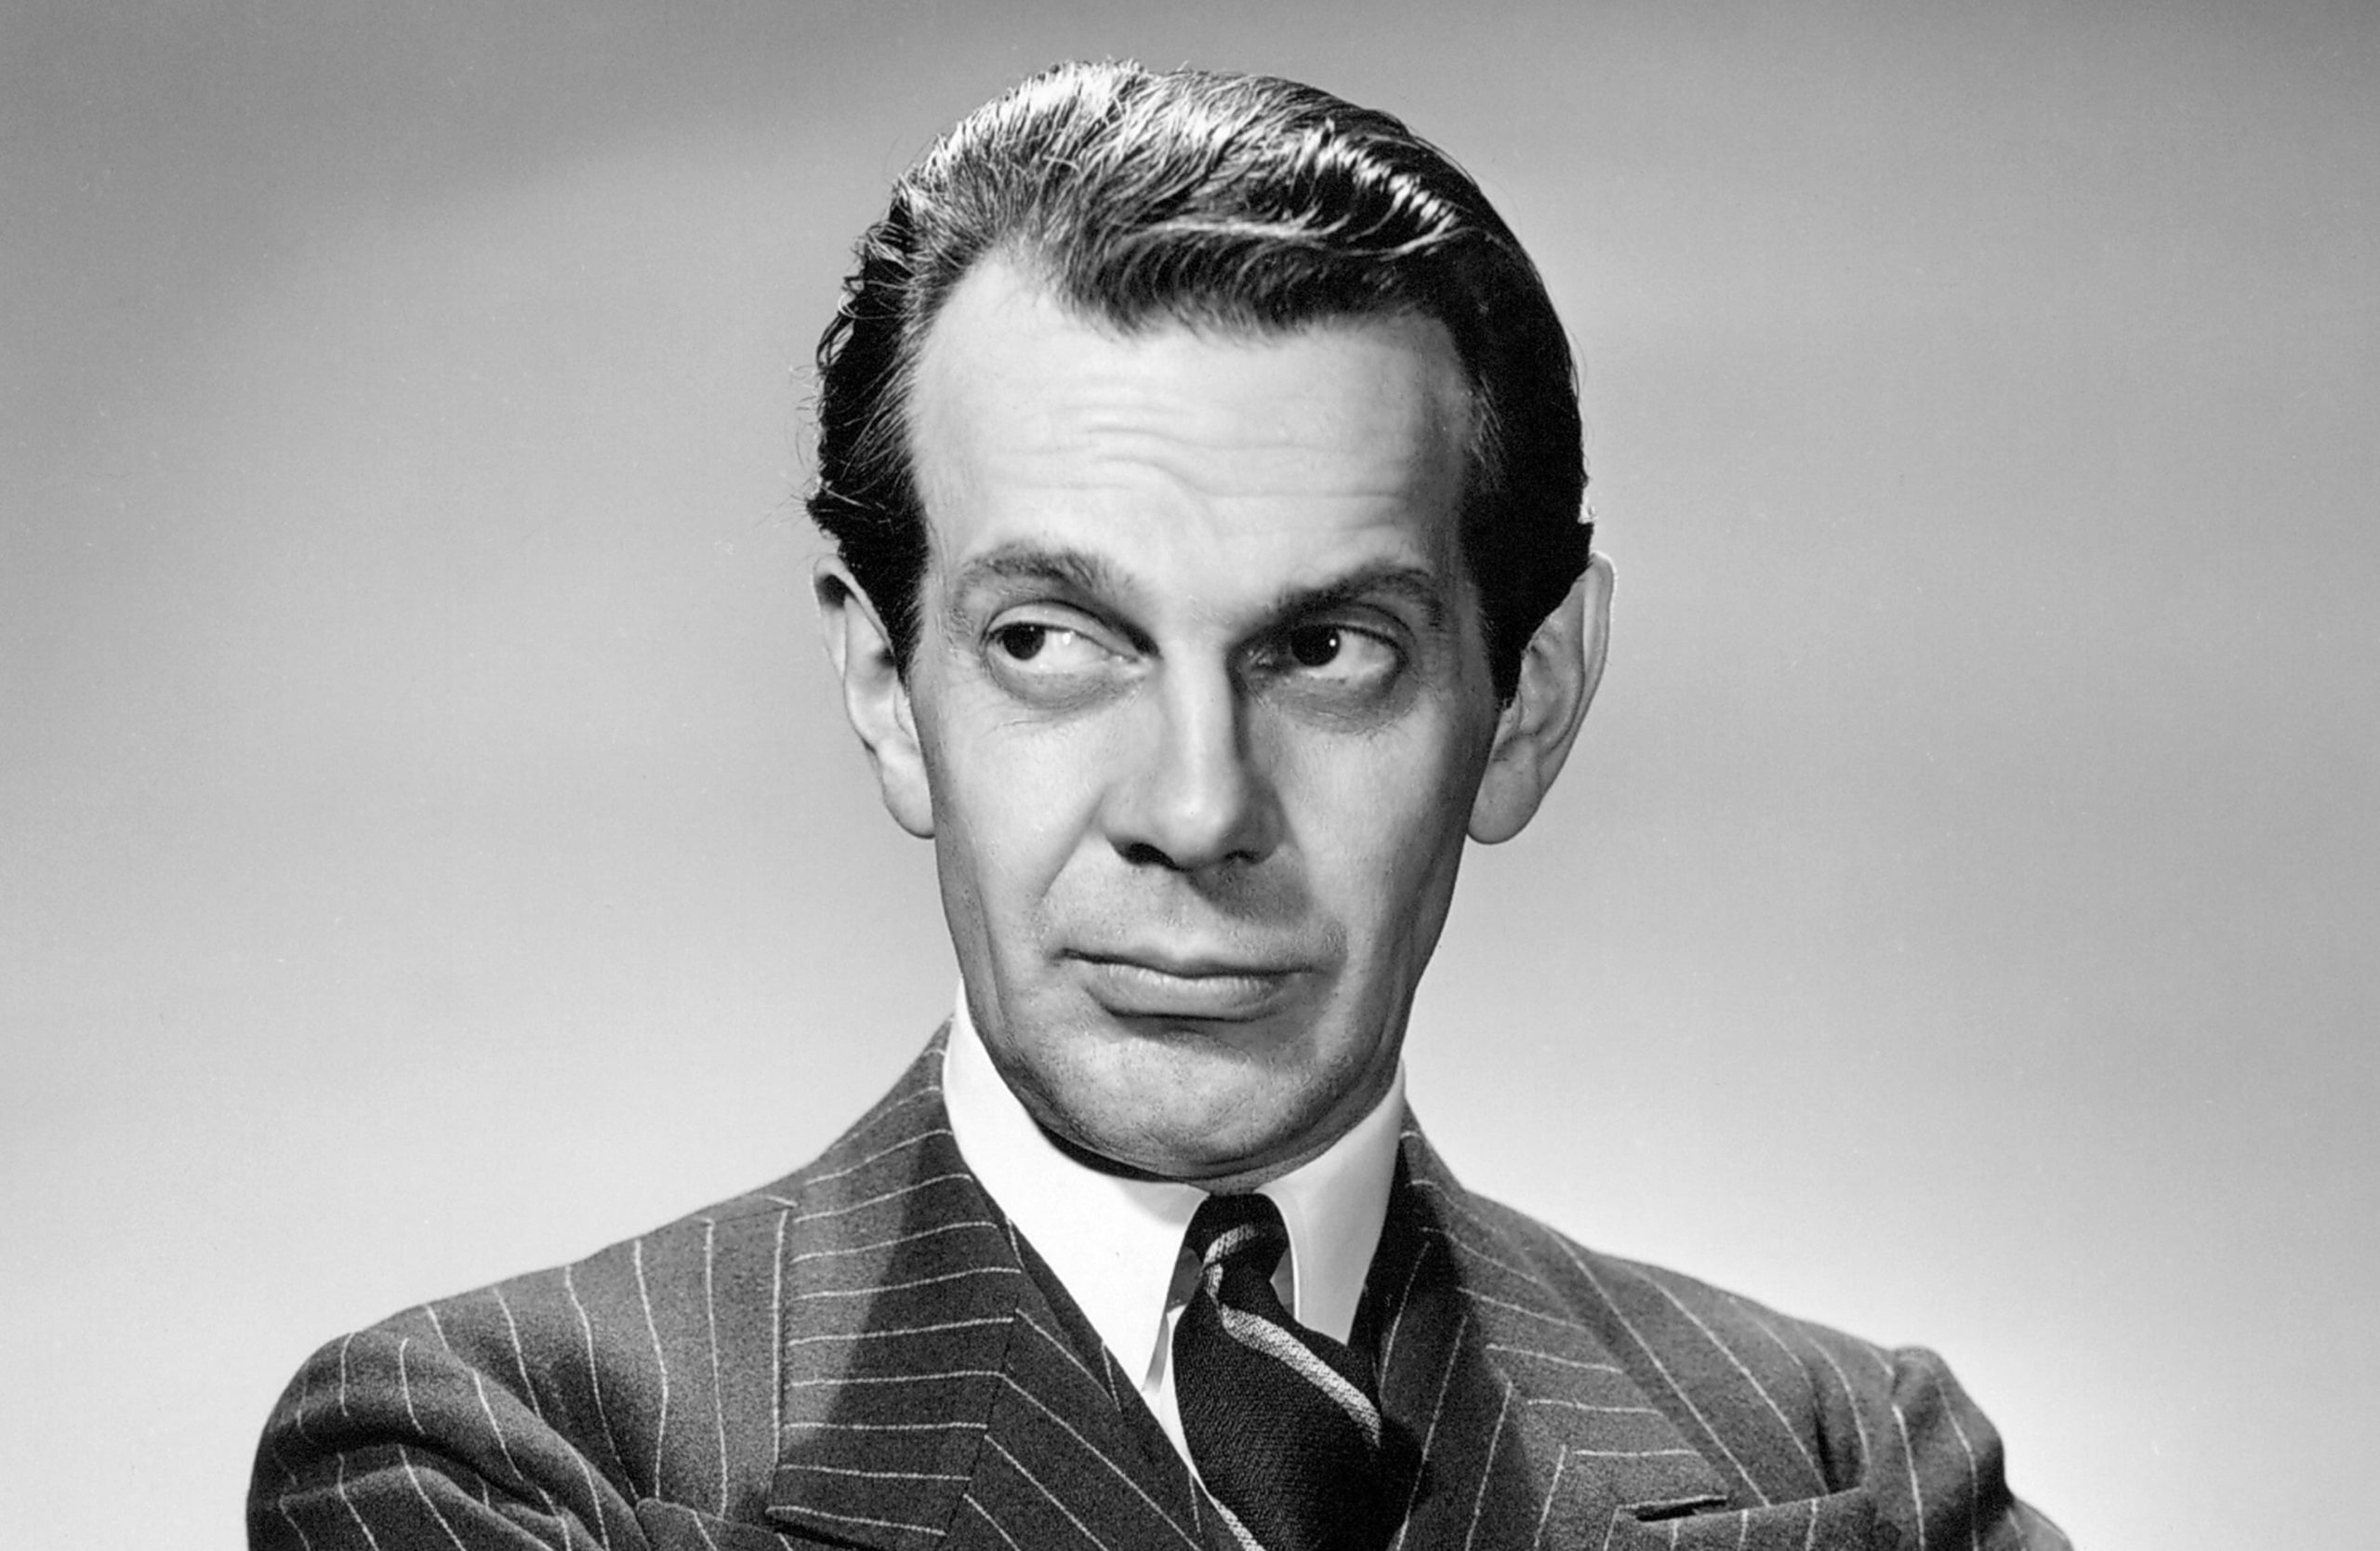 Raymond Massey Dr Kildare Had 3 Kids Sadly None Of Them Survived The Passage Of Time..